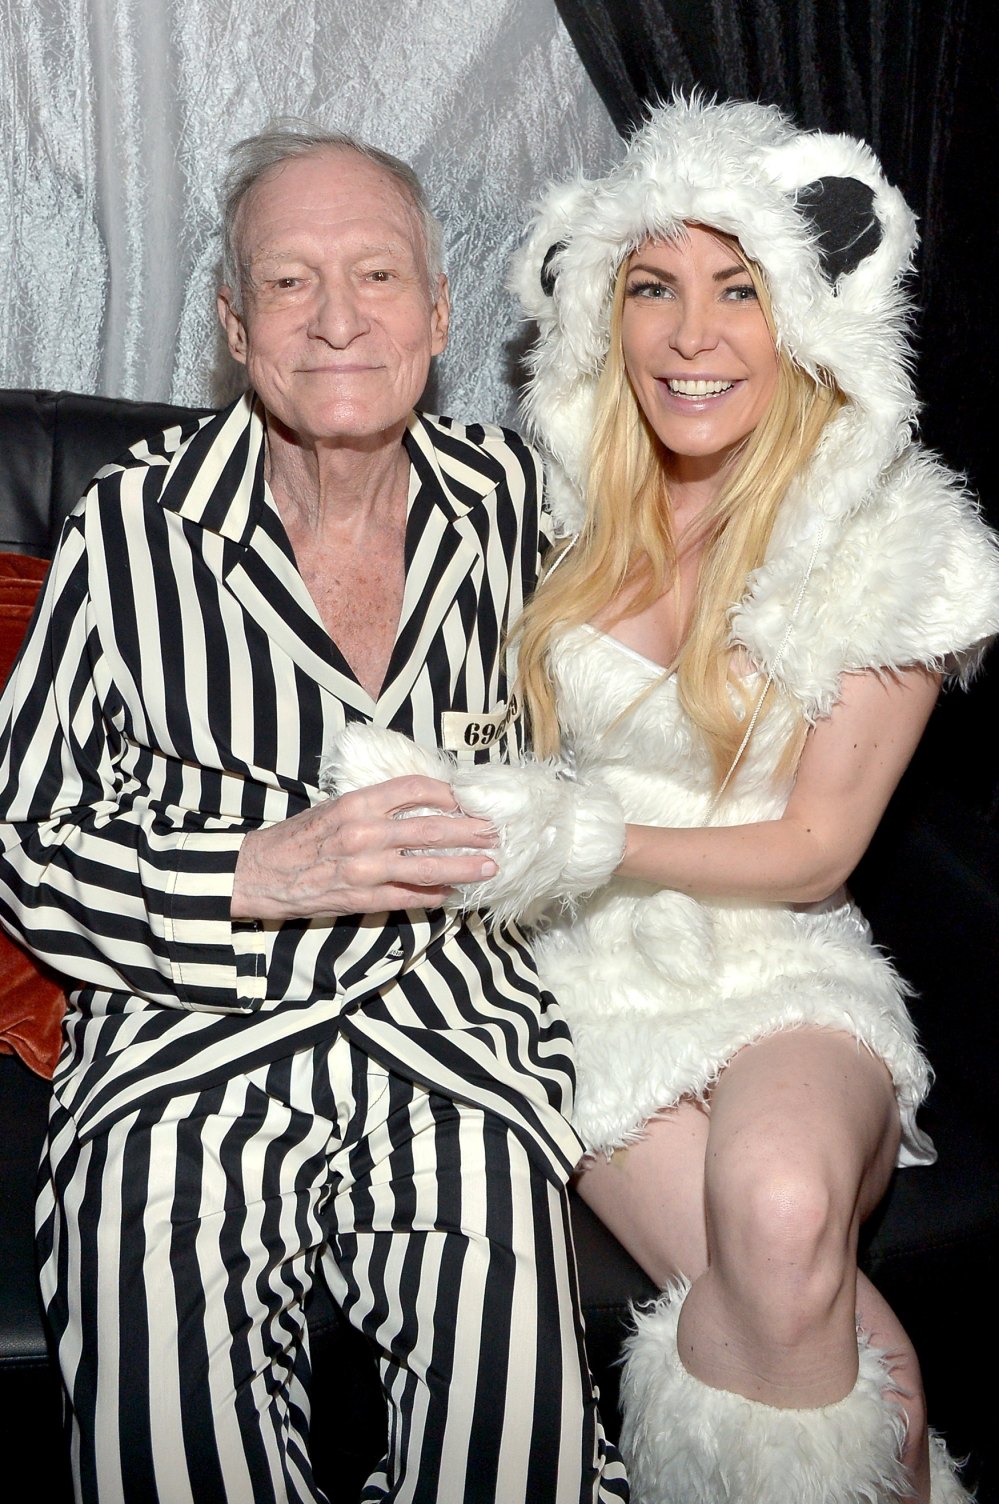 Playboy and Hugh Hefner host the annual Halloween party at the Playboy Mansion